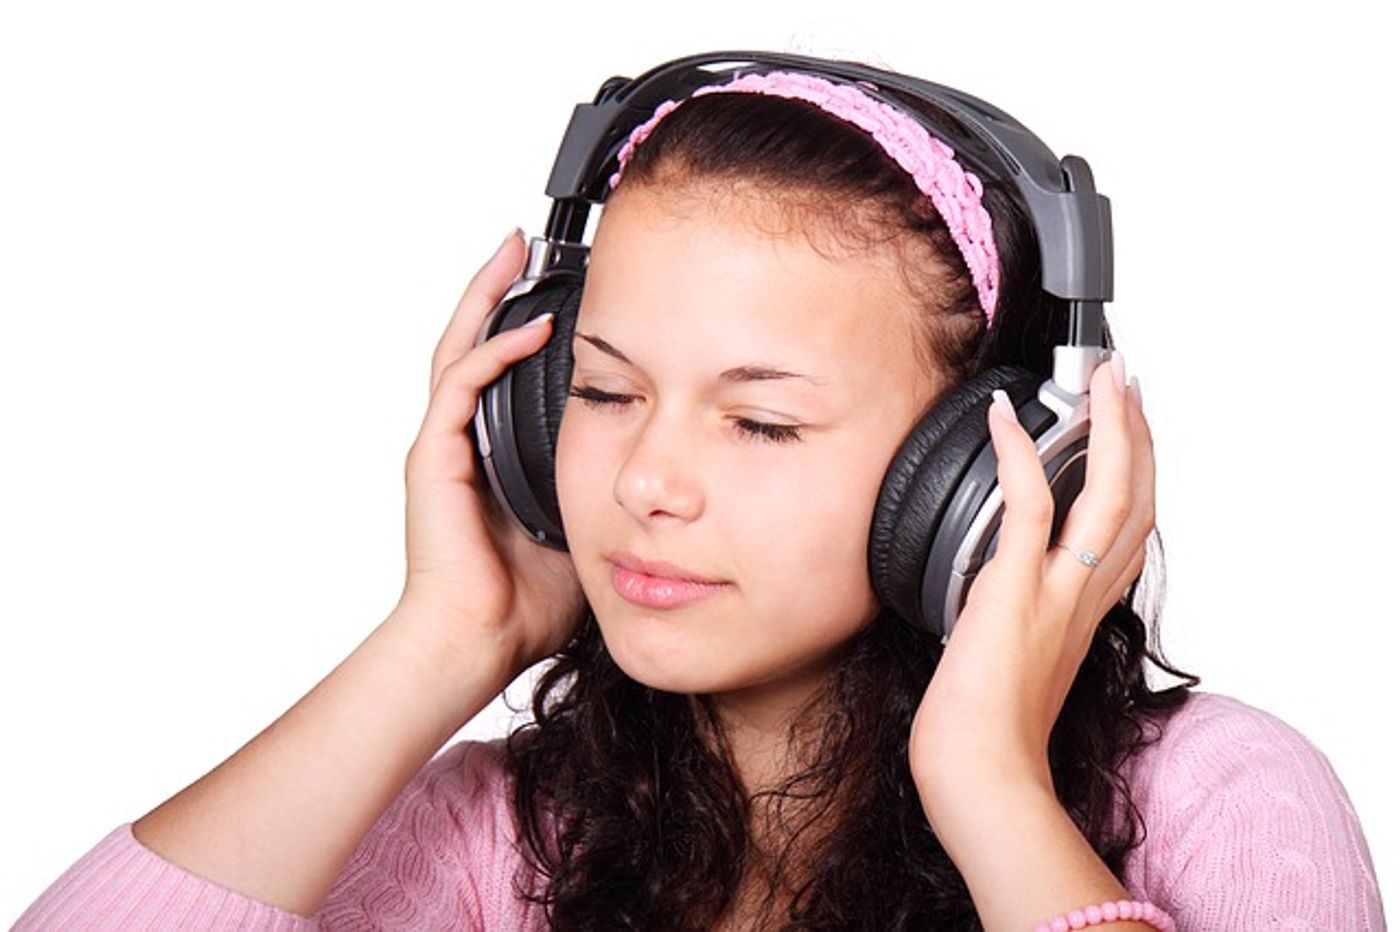 Music has been shown to alleviate stress